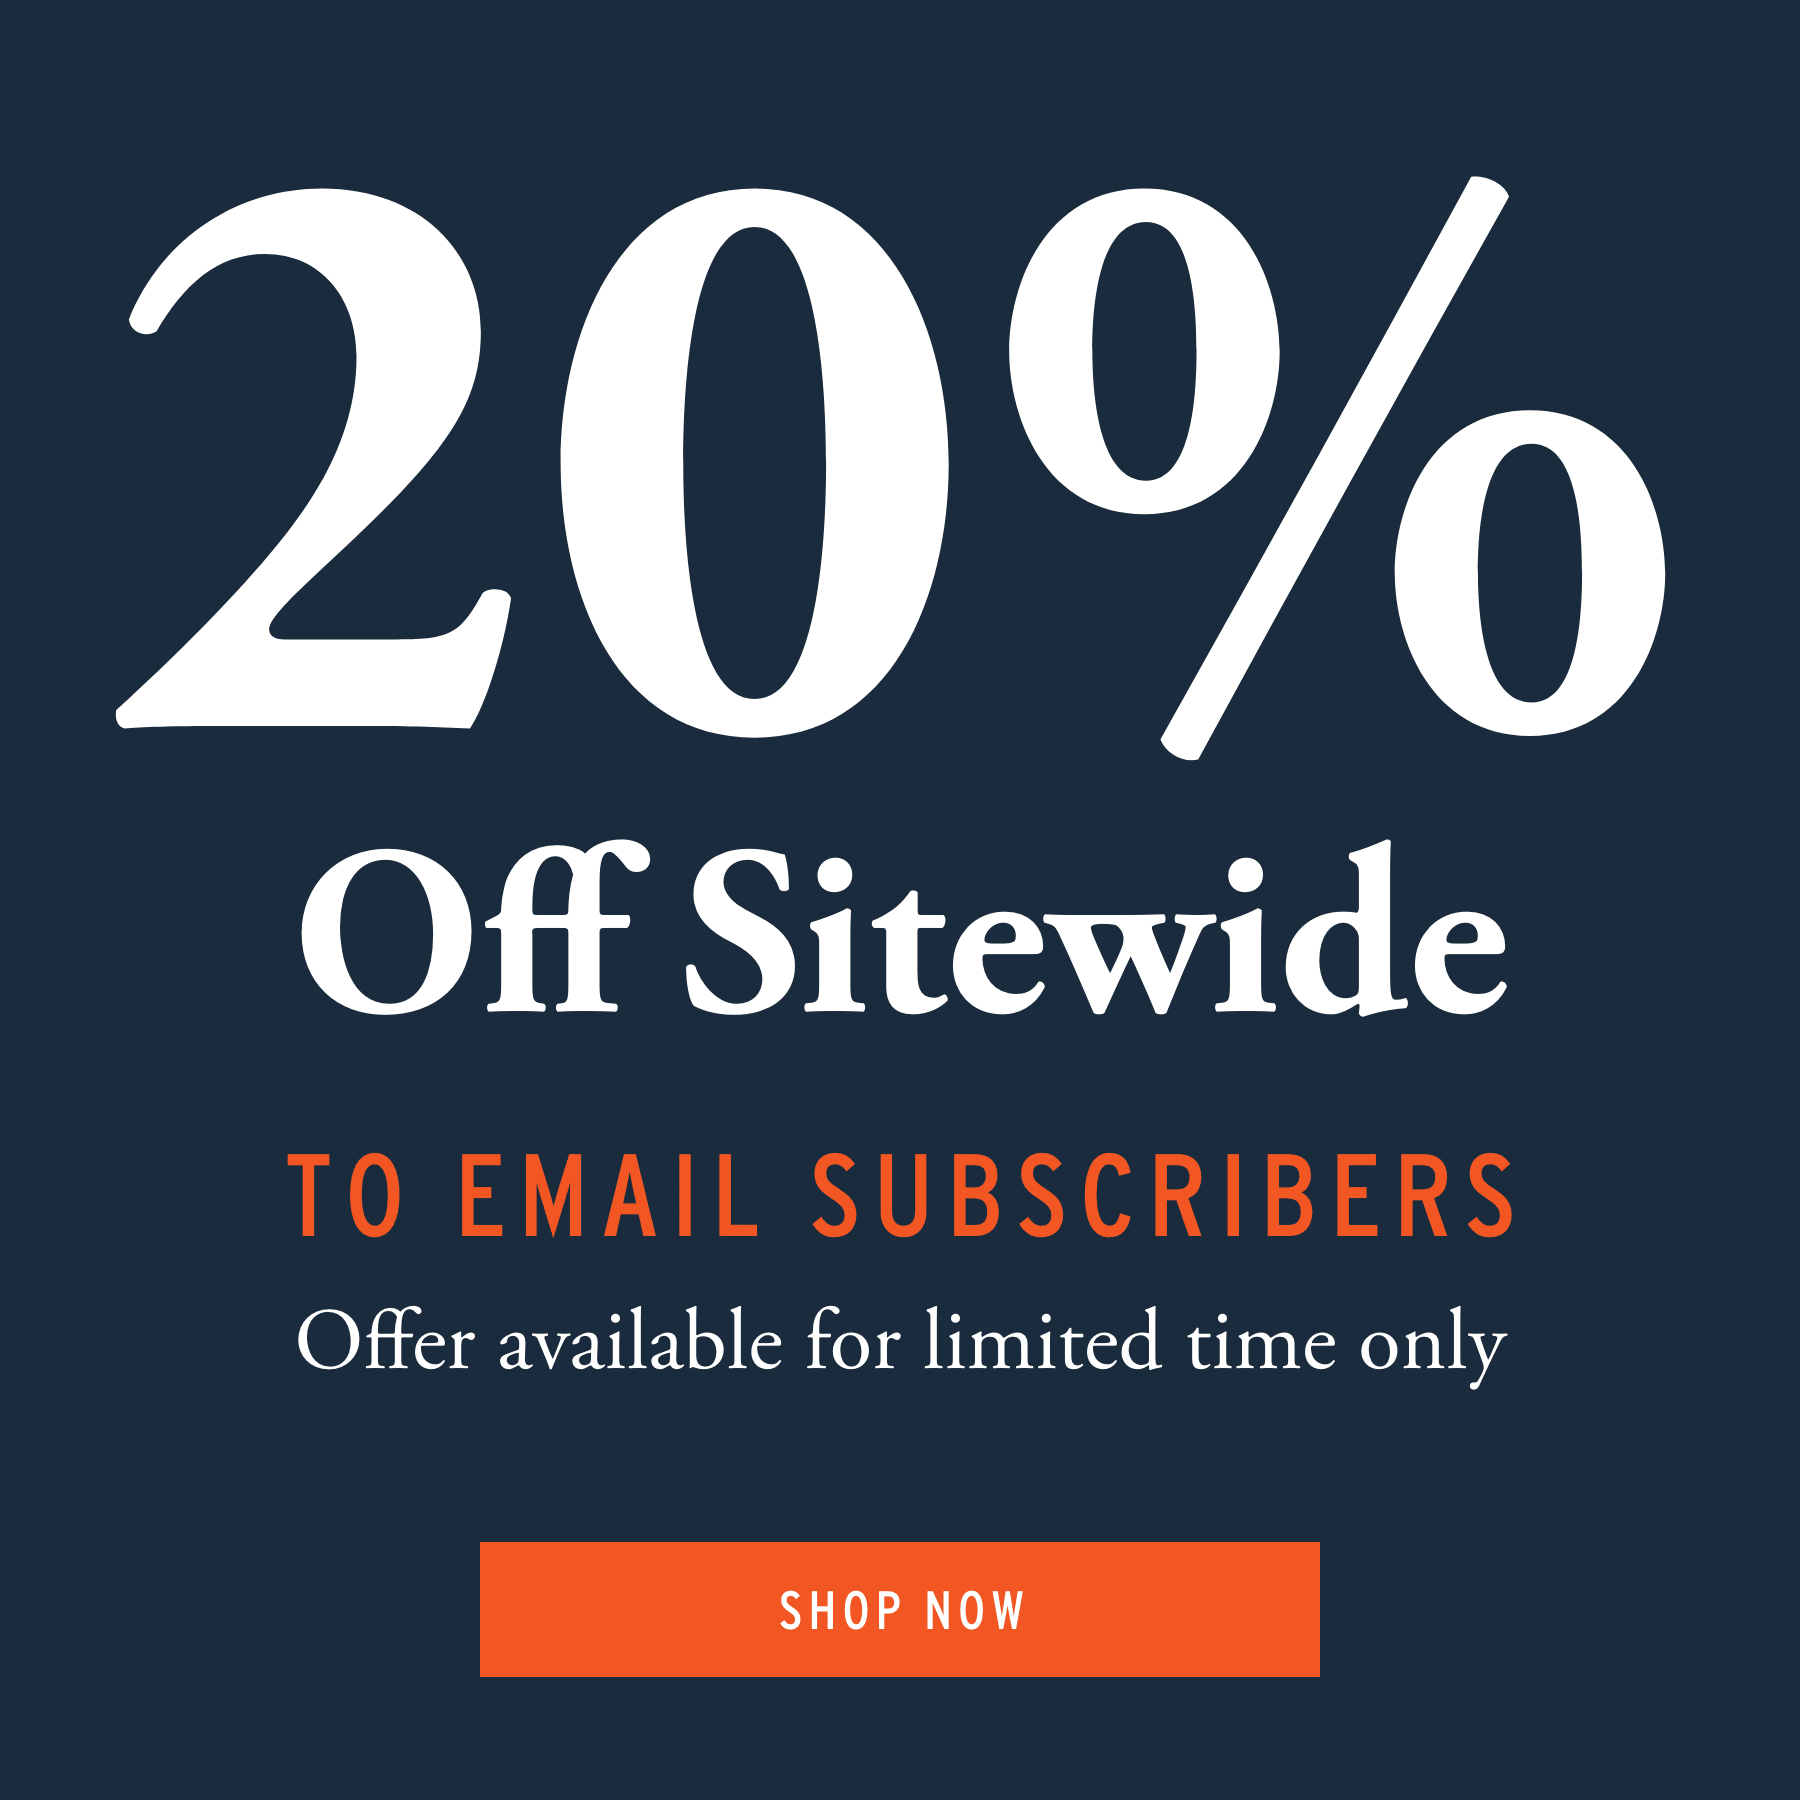 Image. 20% Off Sitewide to email subscribers.